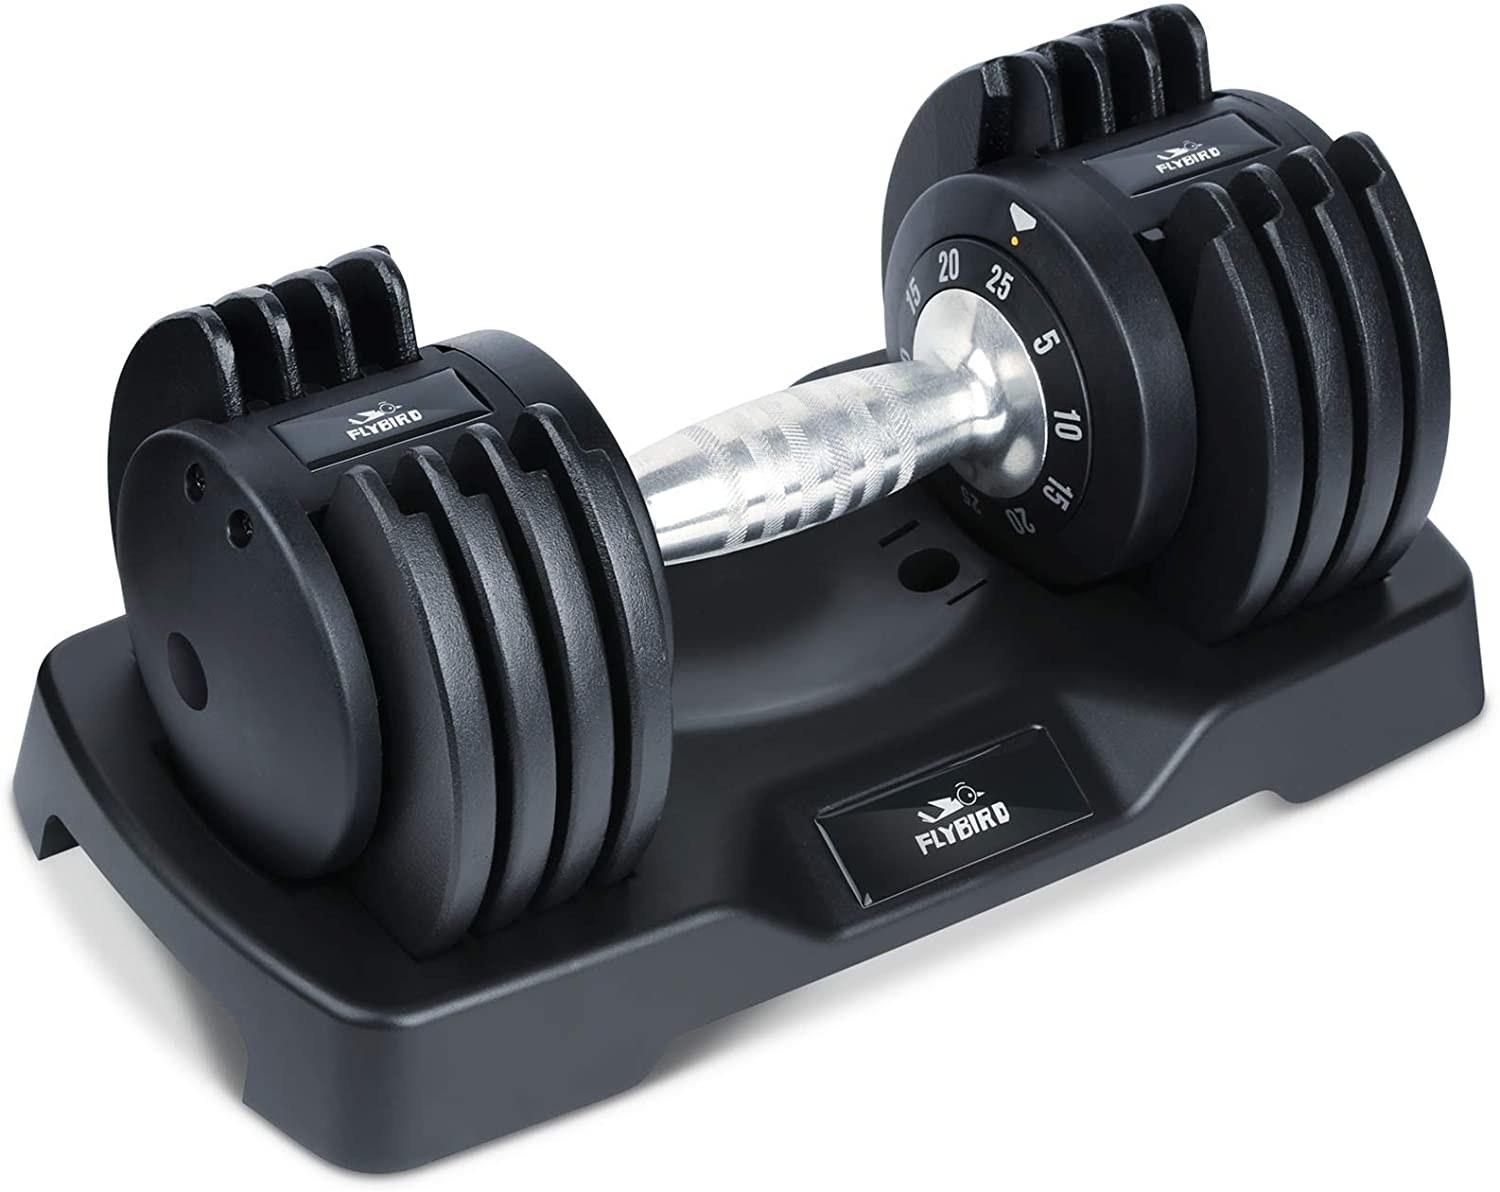 The adjustable dumbbell sitting on its included holder